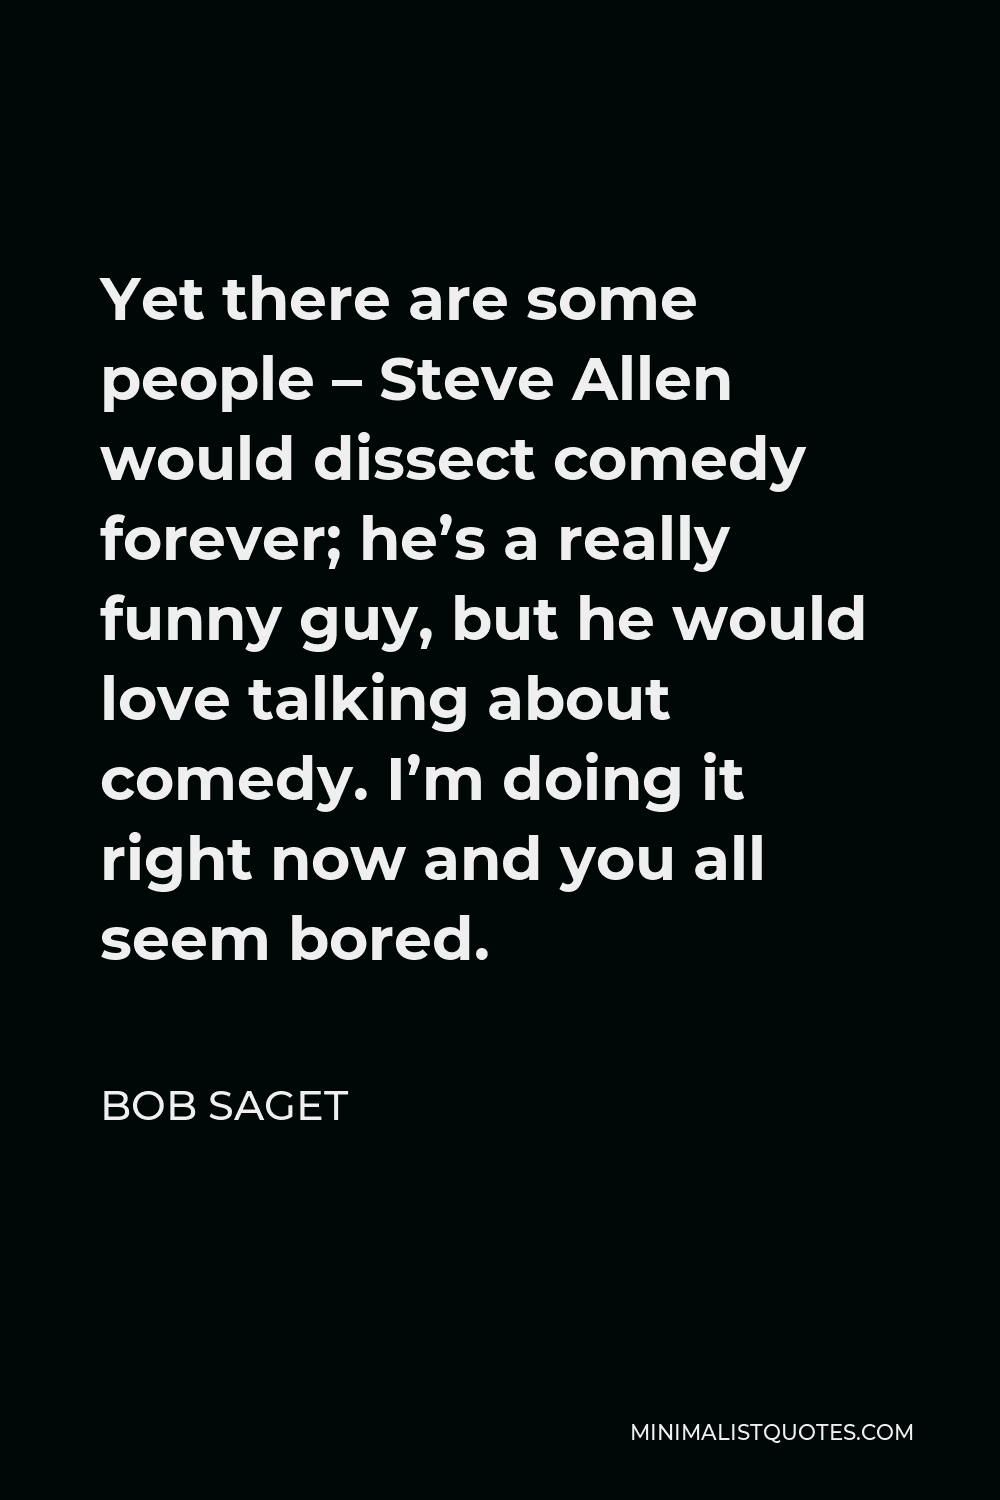 Bob Saget Quote - Yet there are some people – Steve Allen would dissect comedy forever; he’s a really funny guy, but he would love talking about comedy. I’m doing it right now and you all seem bored.